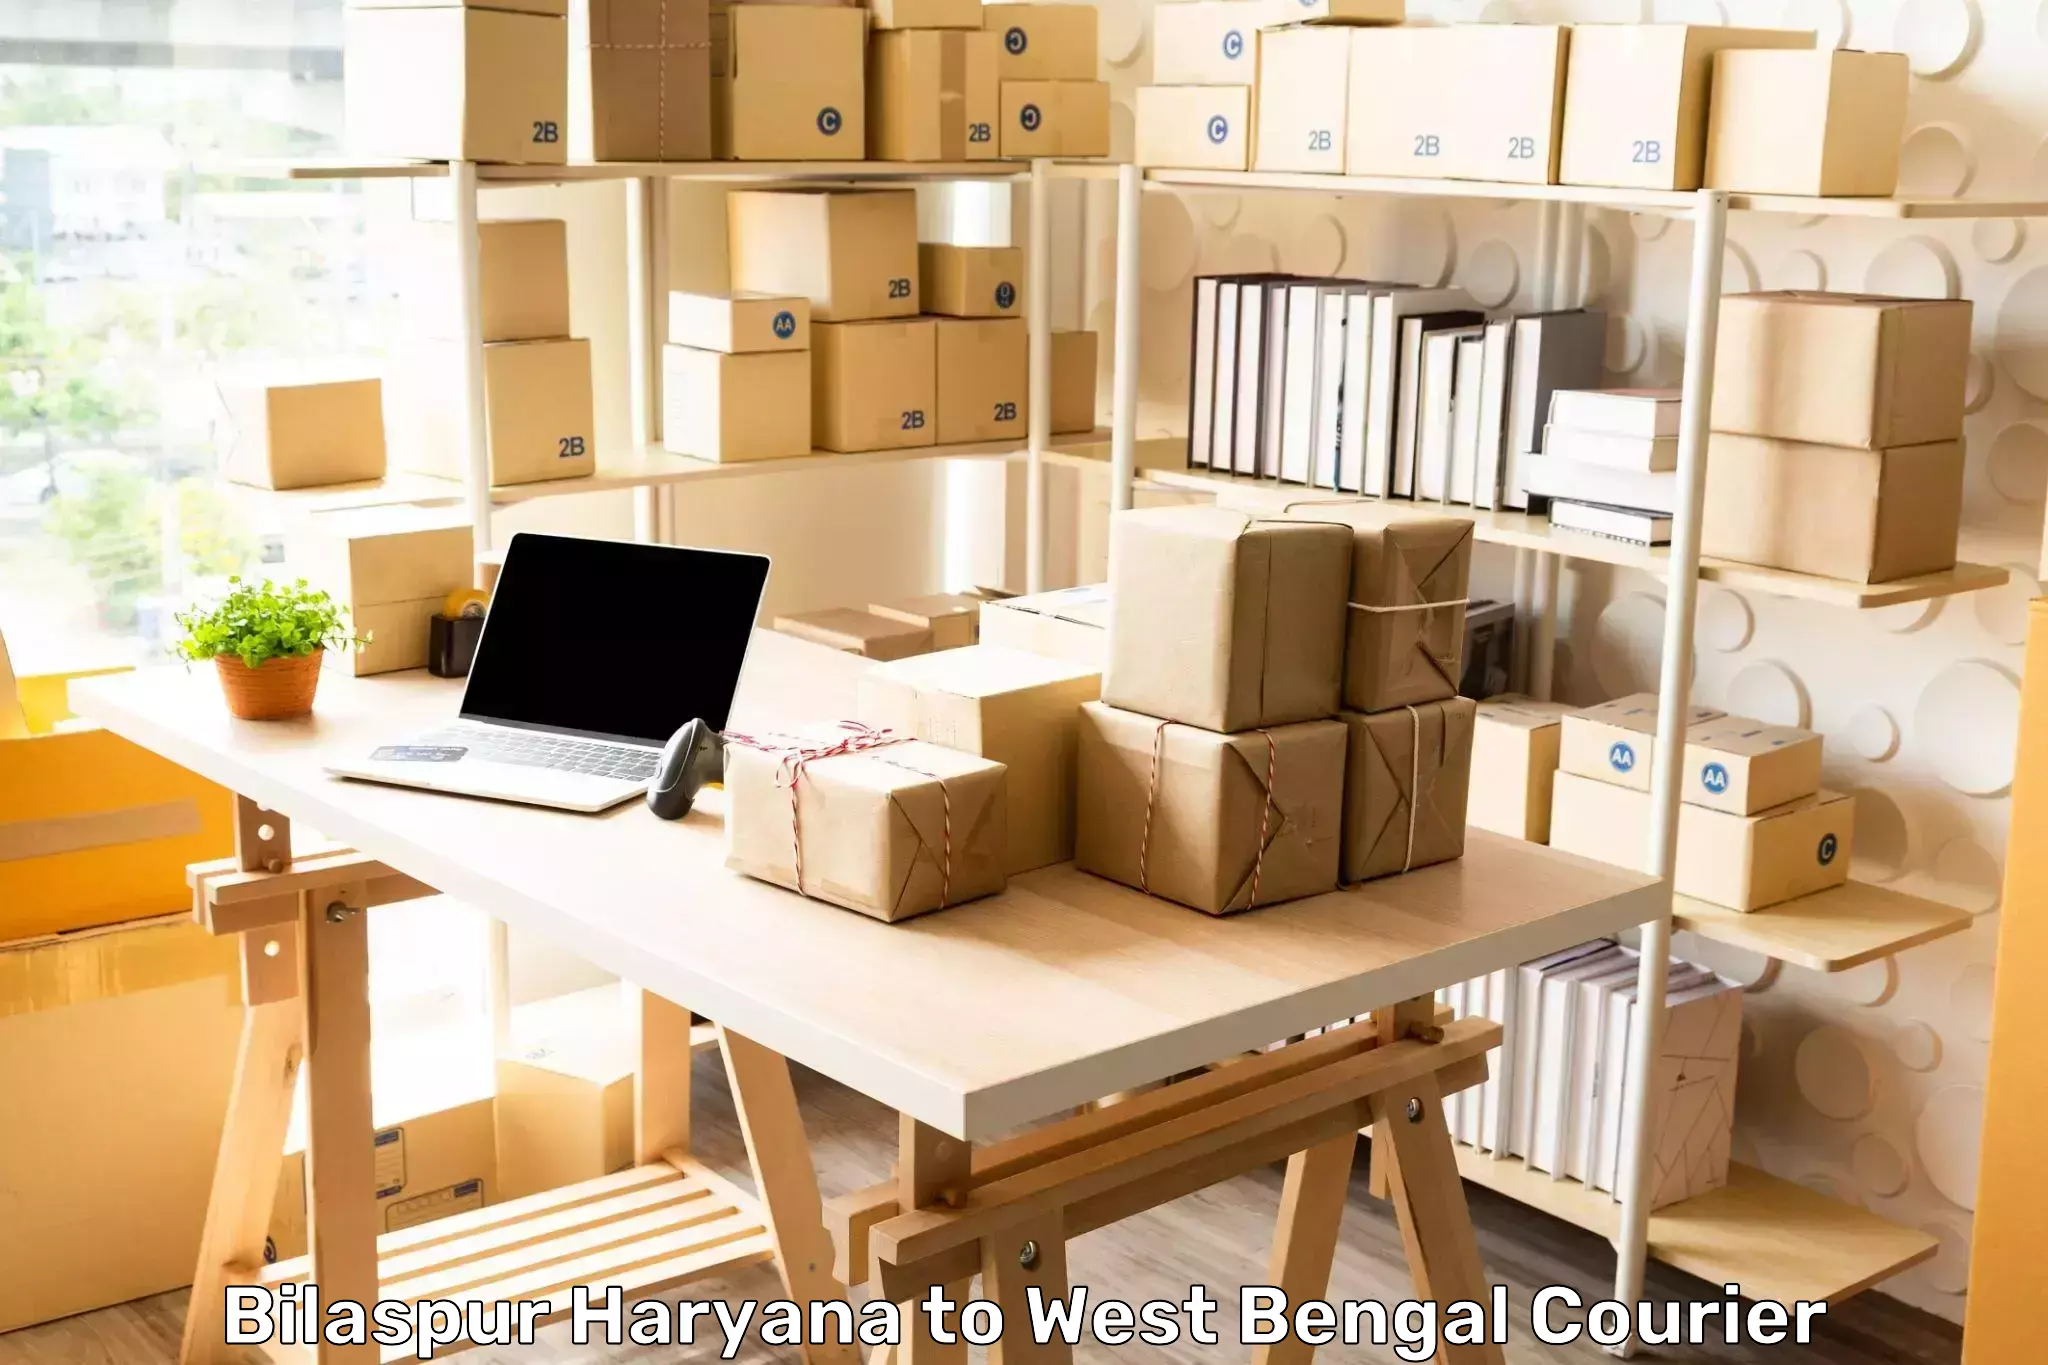 Large-scale shipping solutions Bilaspur Haryana to South 24 Parganas